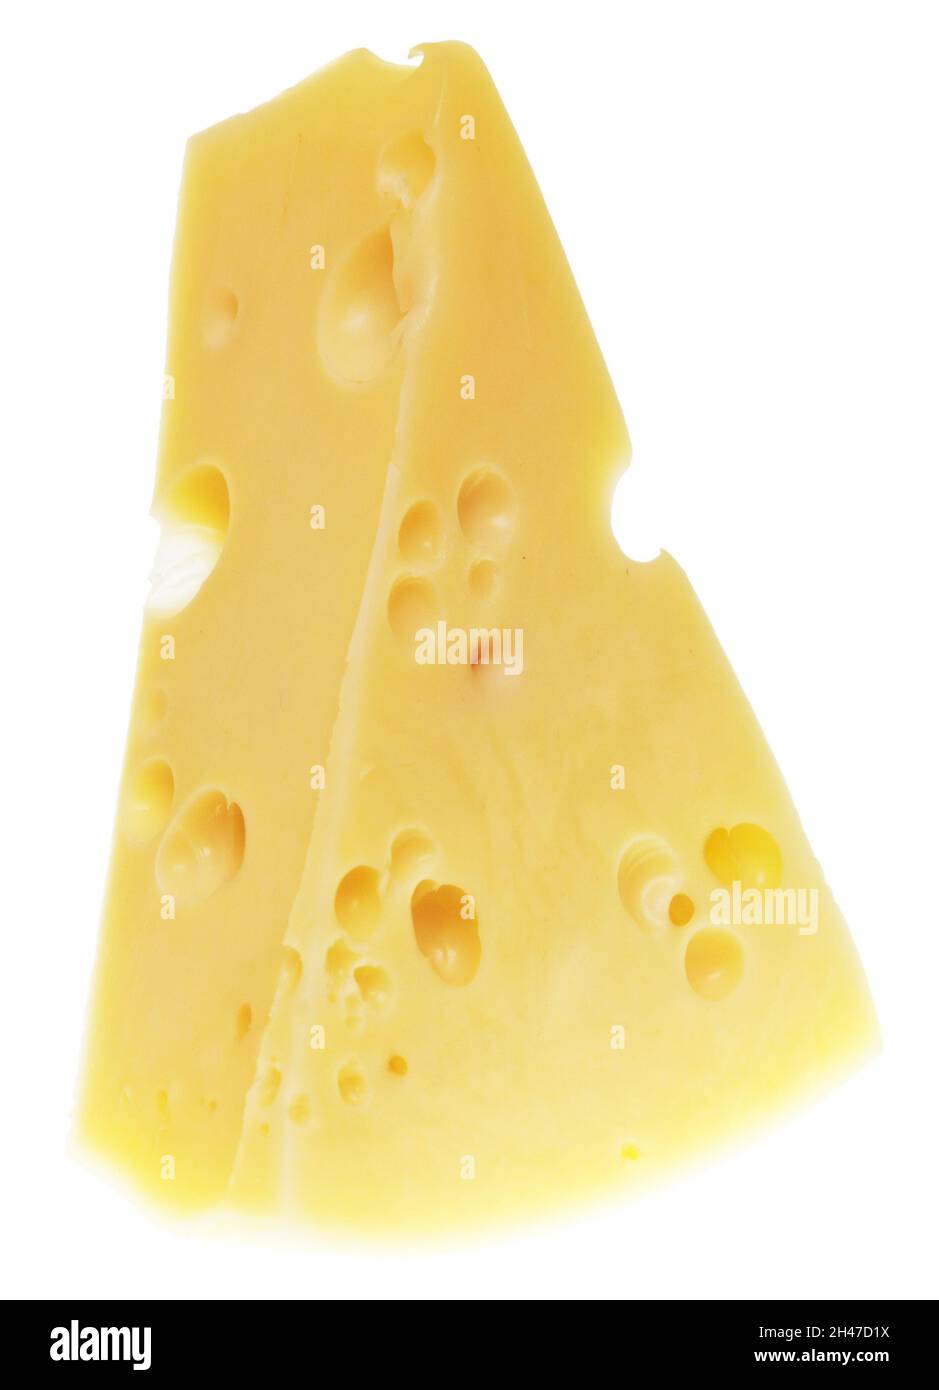 Piece Of Cheese Isolated On White Background Stock Photo Alamy